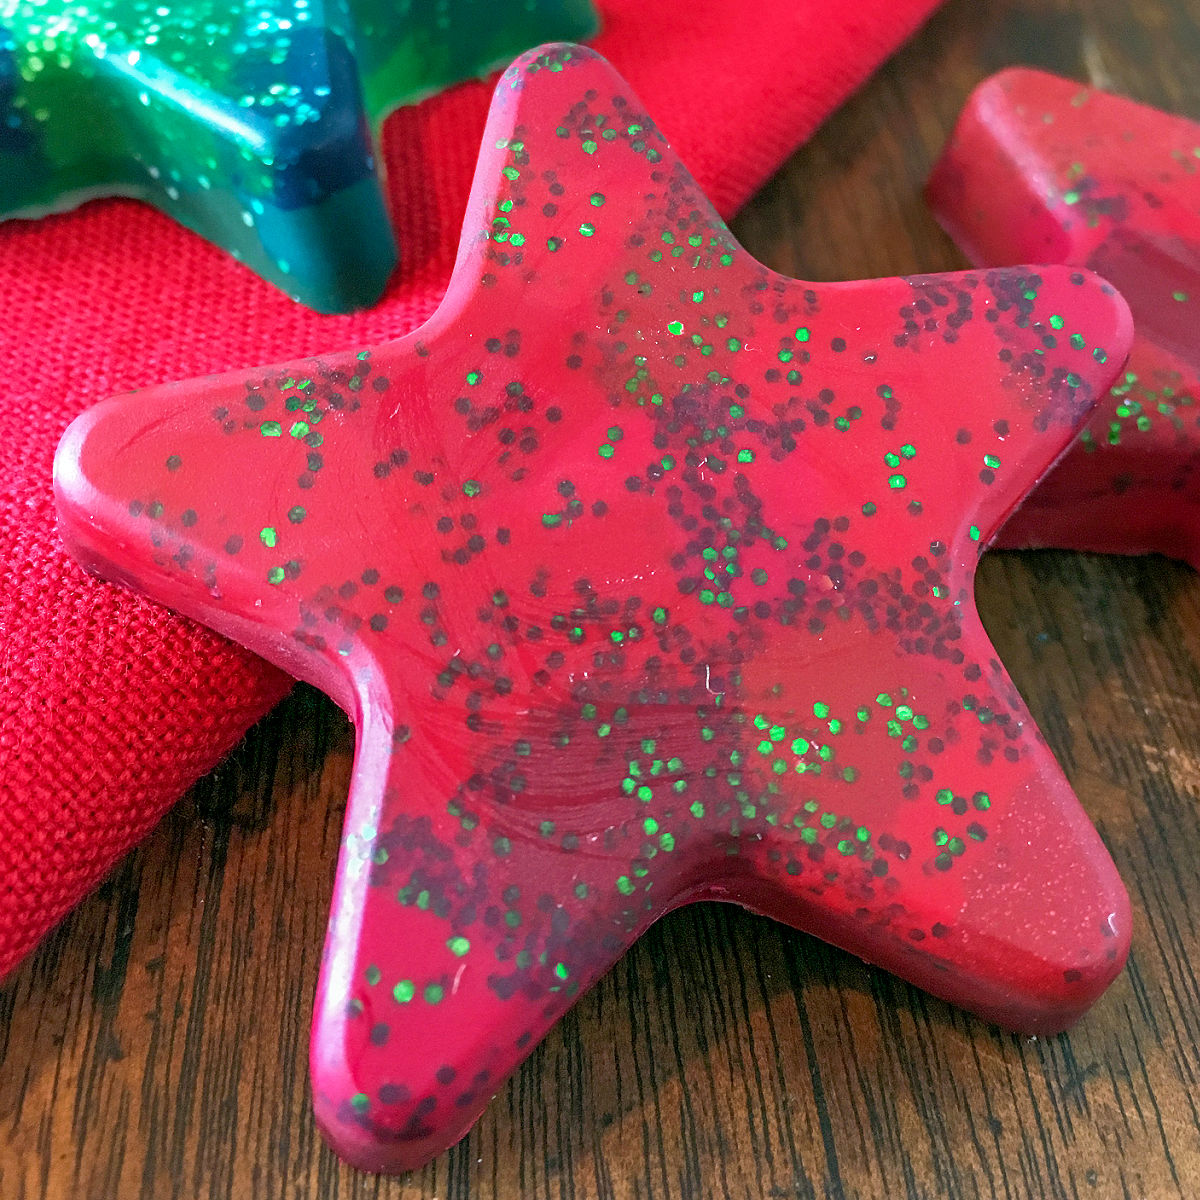 Homemade red star glitter crayon made from melted crayons.